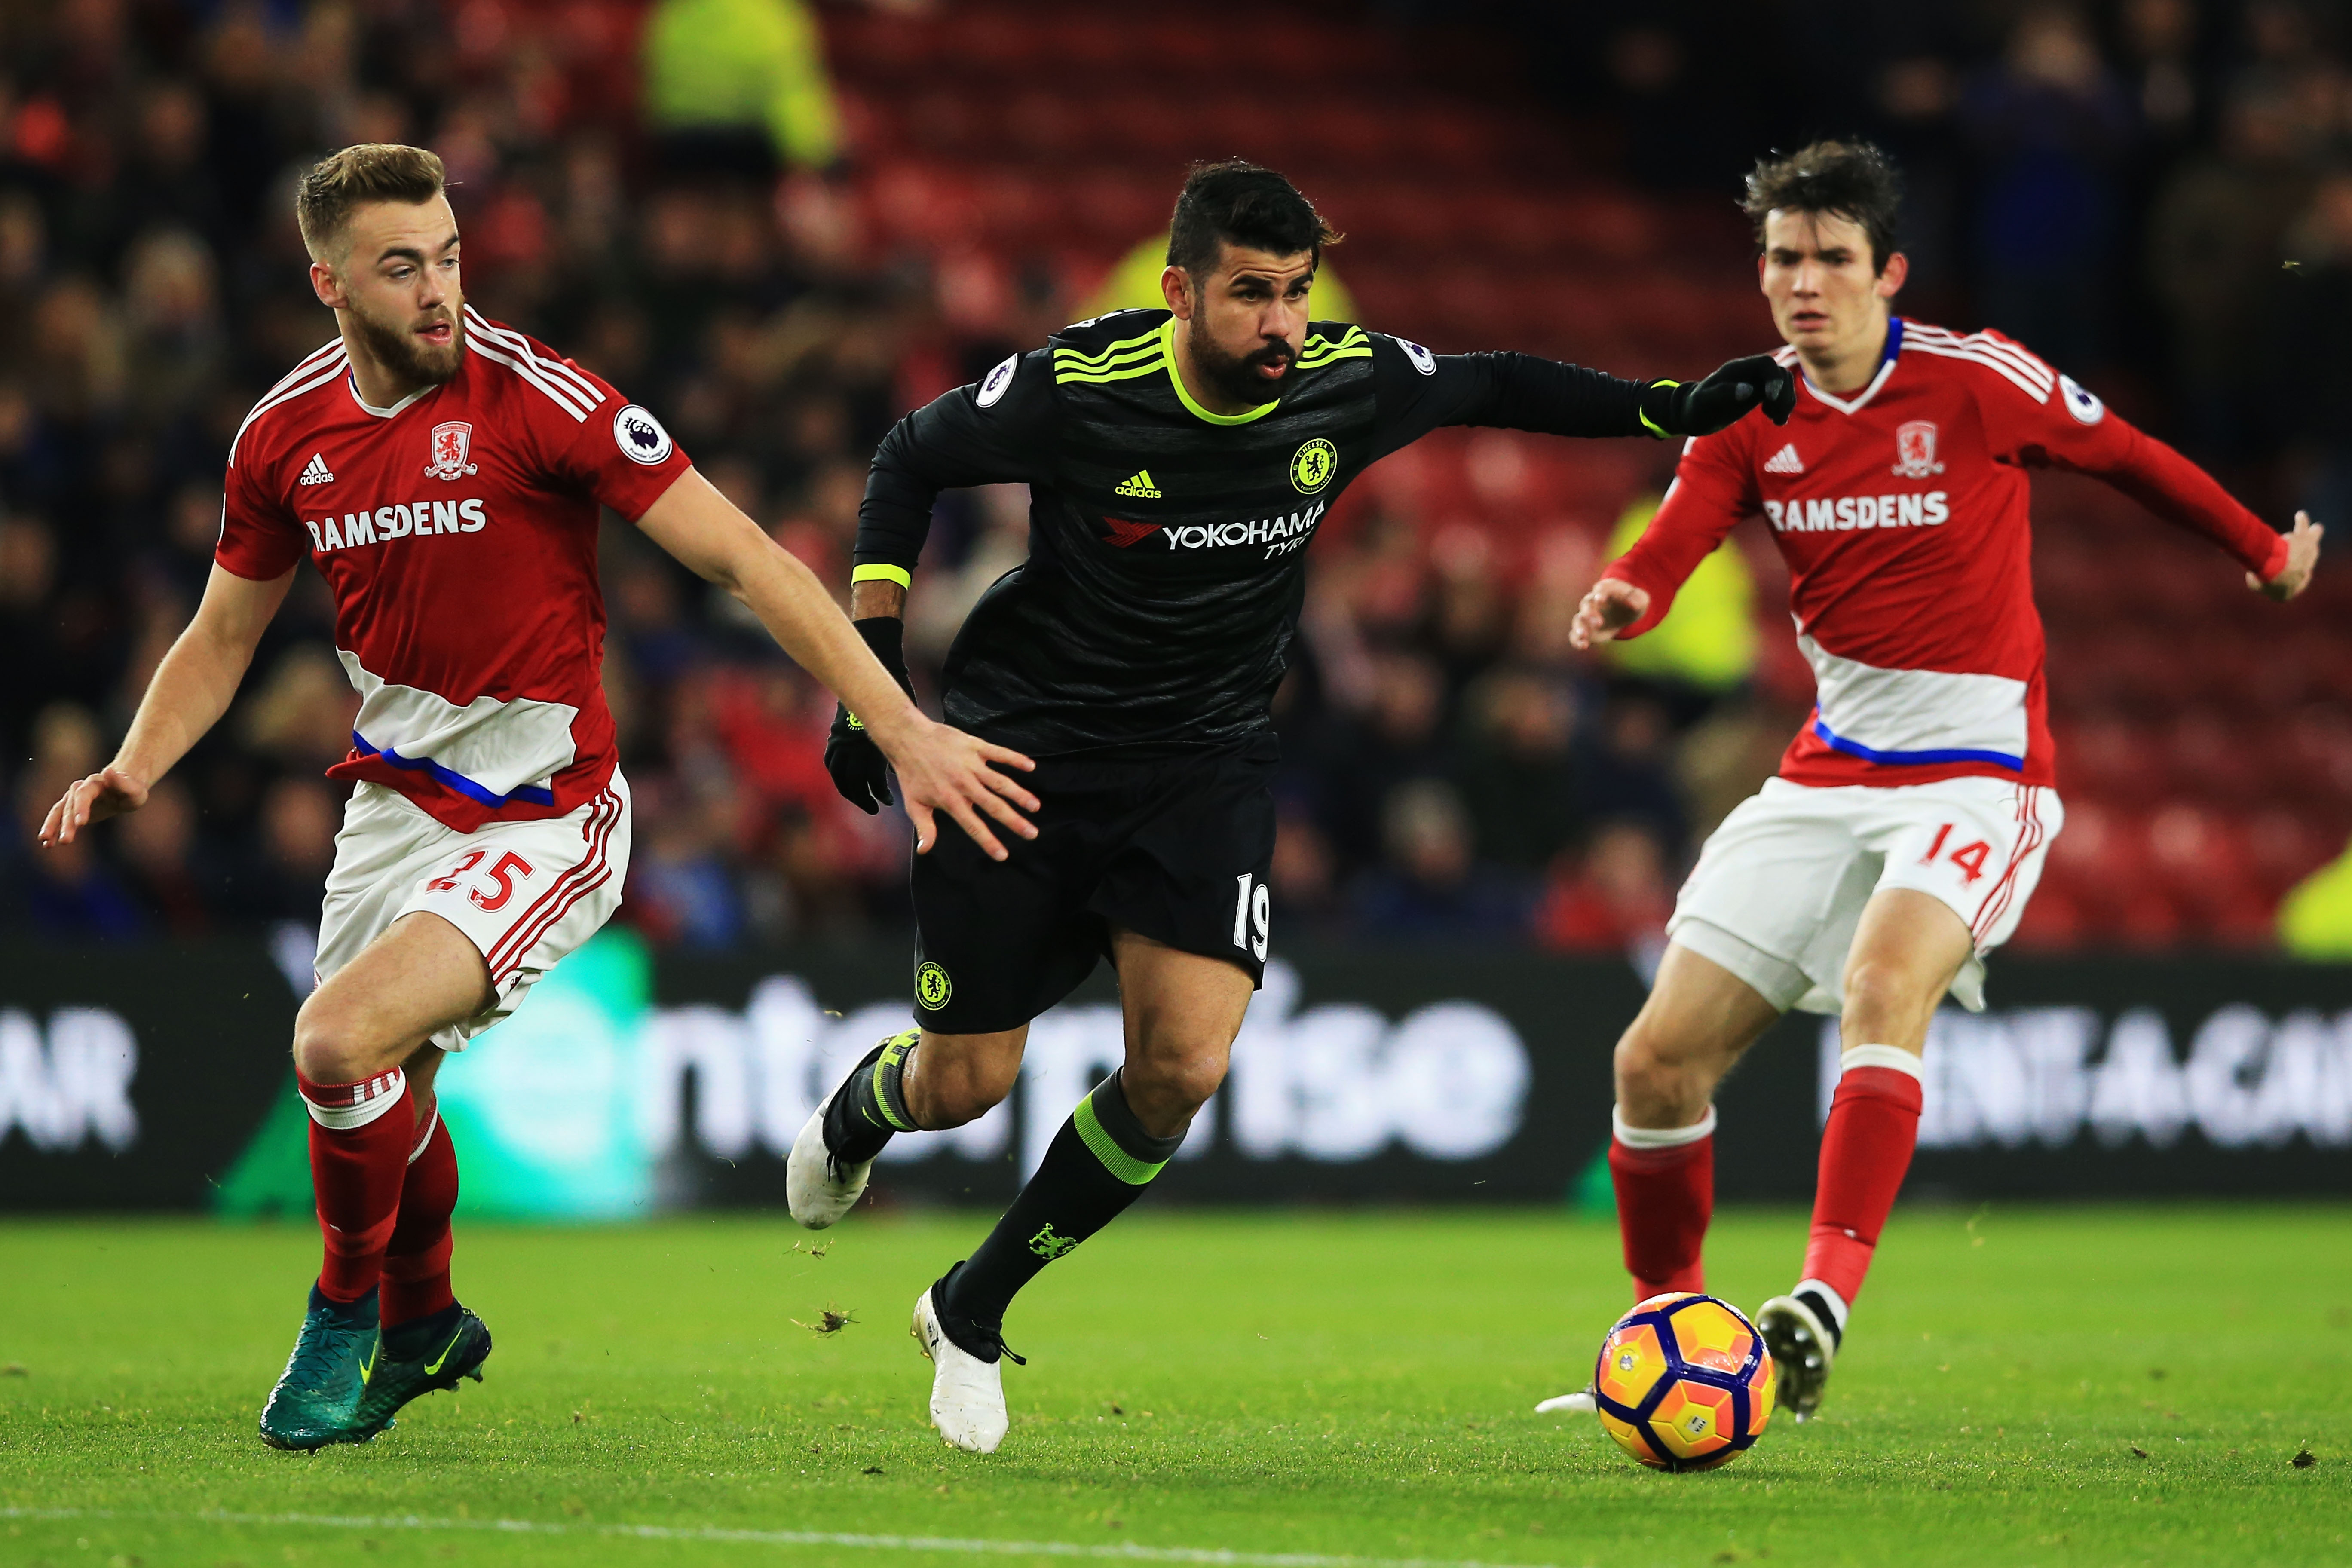 MIDDLESBROUGH, ENGLAND - NOVEMBER 20:  Diego Costa of Chelsea is closed down by Calum Chambers (L) and Marten de Roon of Middlesbrough during the Premier League match between Middlesbrough and Chelsea at Riverside Stadium on November 20, 2016 in Middlesbrough, England.  (Photo by Jan Kruger/Getty Images)